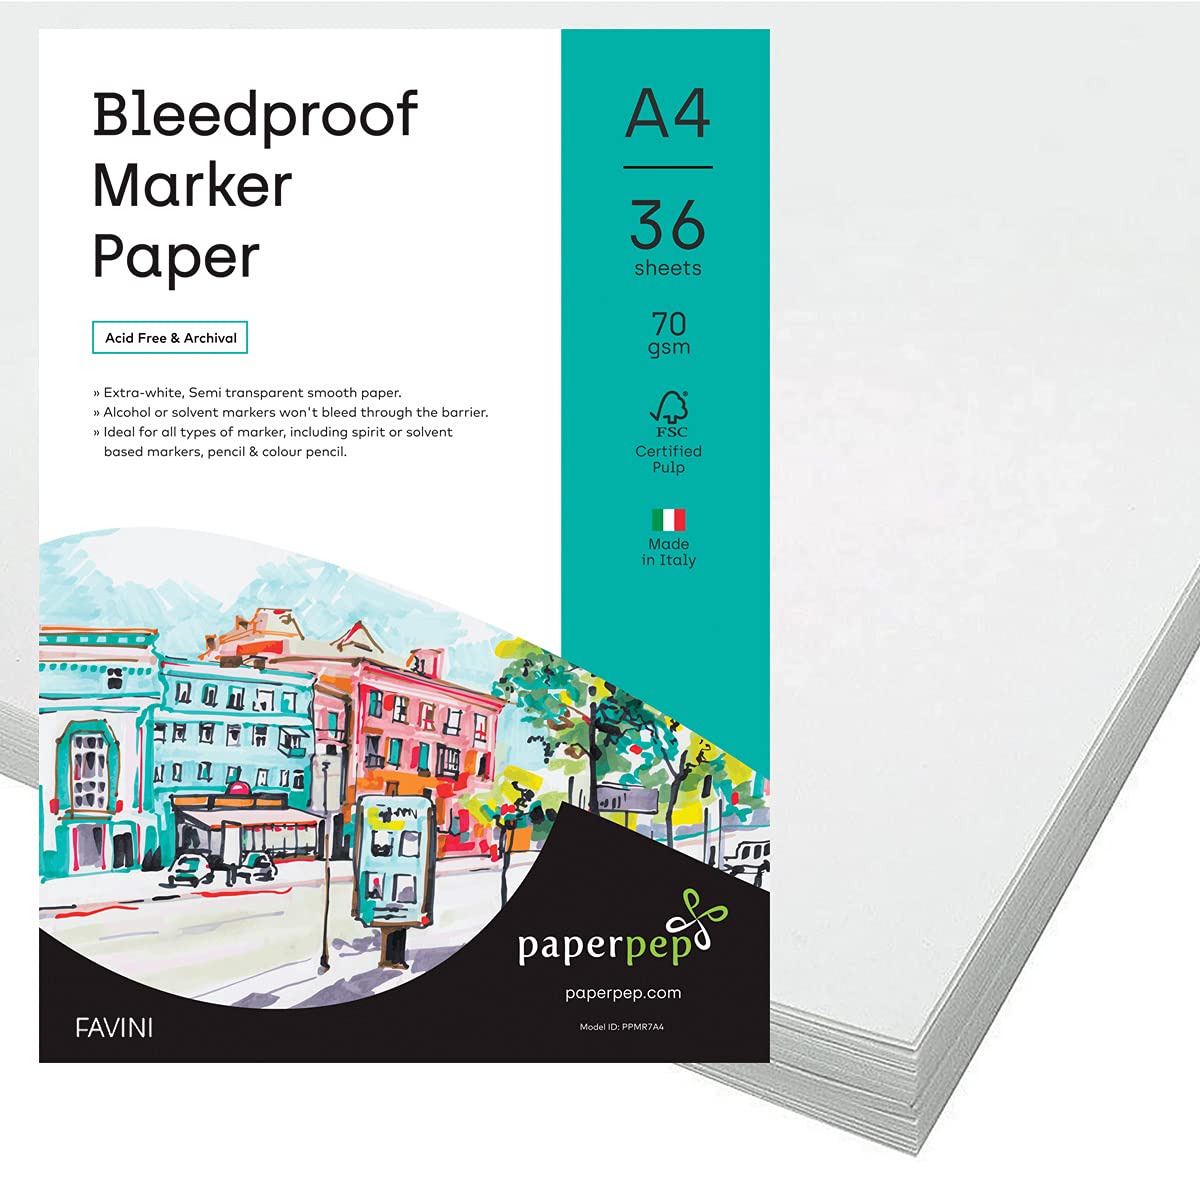 PaperPep Bleedproof Marker Paper 70GSM A4 Pack of 72 for Spirit or Solvent Based Markers, Pencil & Colour Pencil, Illustration, Design & Manga for Artists' & Amateurs